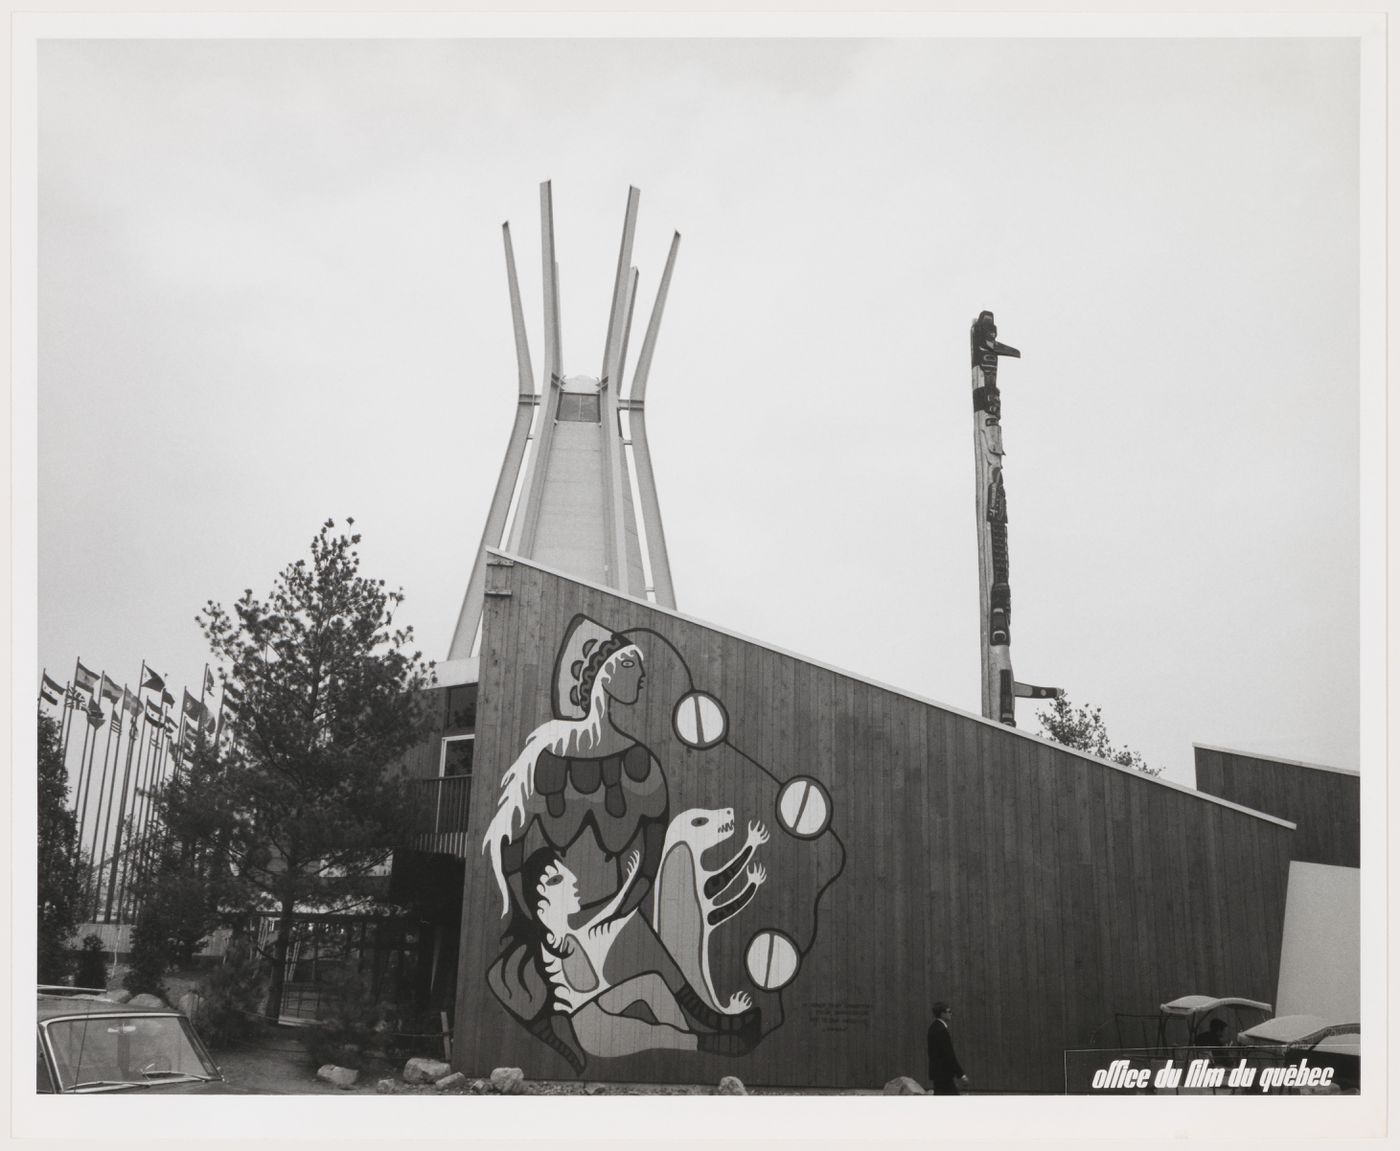 A black-and-white photograph of Anishinaabe artist Norval Morrisseau’s mural at the Indians of Canada Pavilion. The mural, painted directly on the vertical cedar boards of the building, depicts the Earth Mother with long, white hair, a head covering, and exposed breasts, along with a child with long black hair, and a white and yellow bear cub. A series of circular forms linked with black lines connects the figures to the ground plane. The “tipi” and totem pole are visible in the background.